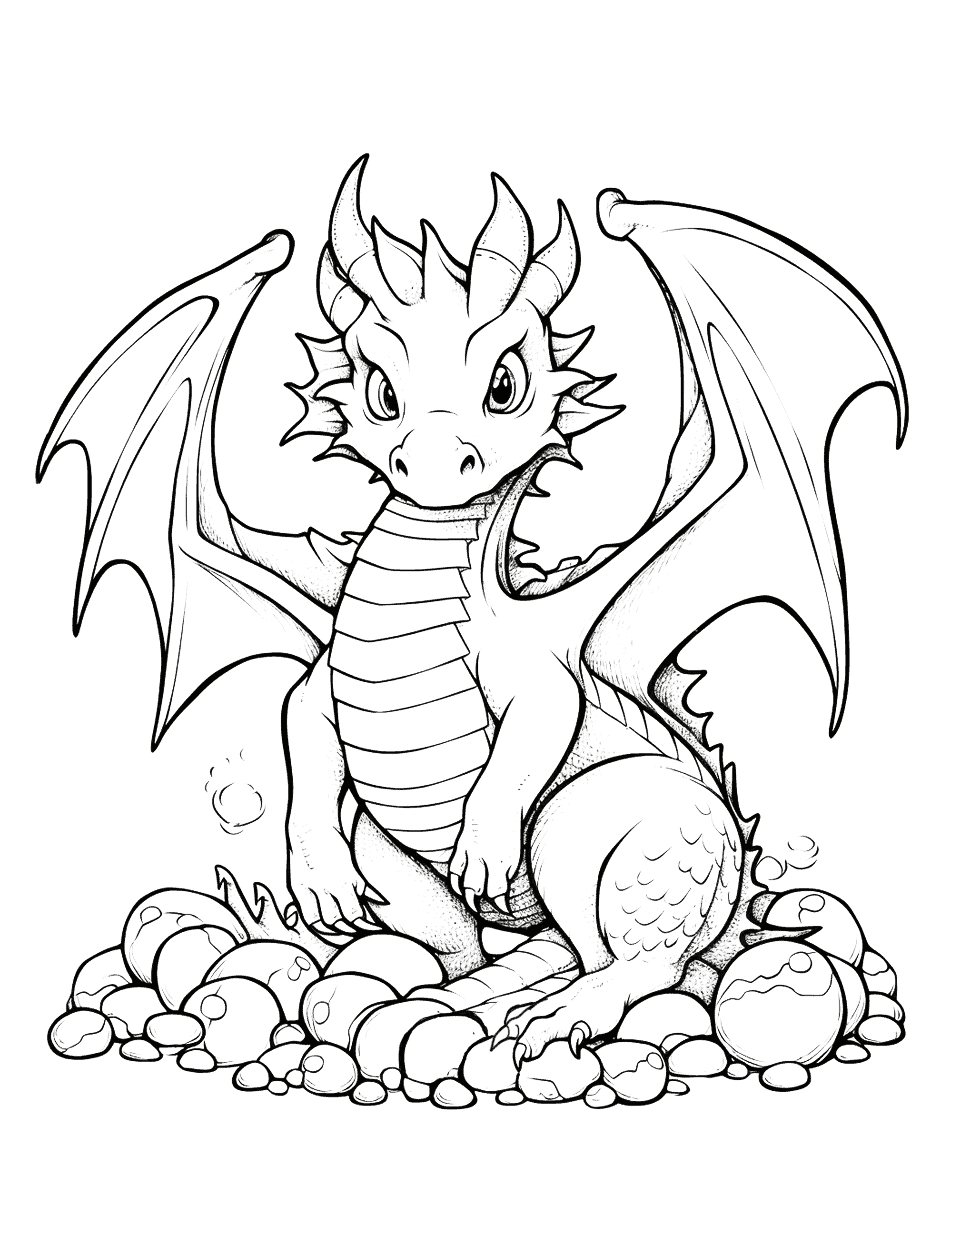 Mythical Dragon Coloring Page - A majestic mythical dragon surrounded by a hoard of golden treasures.